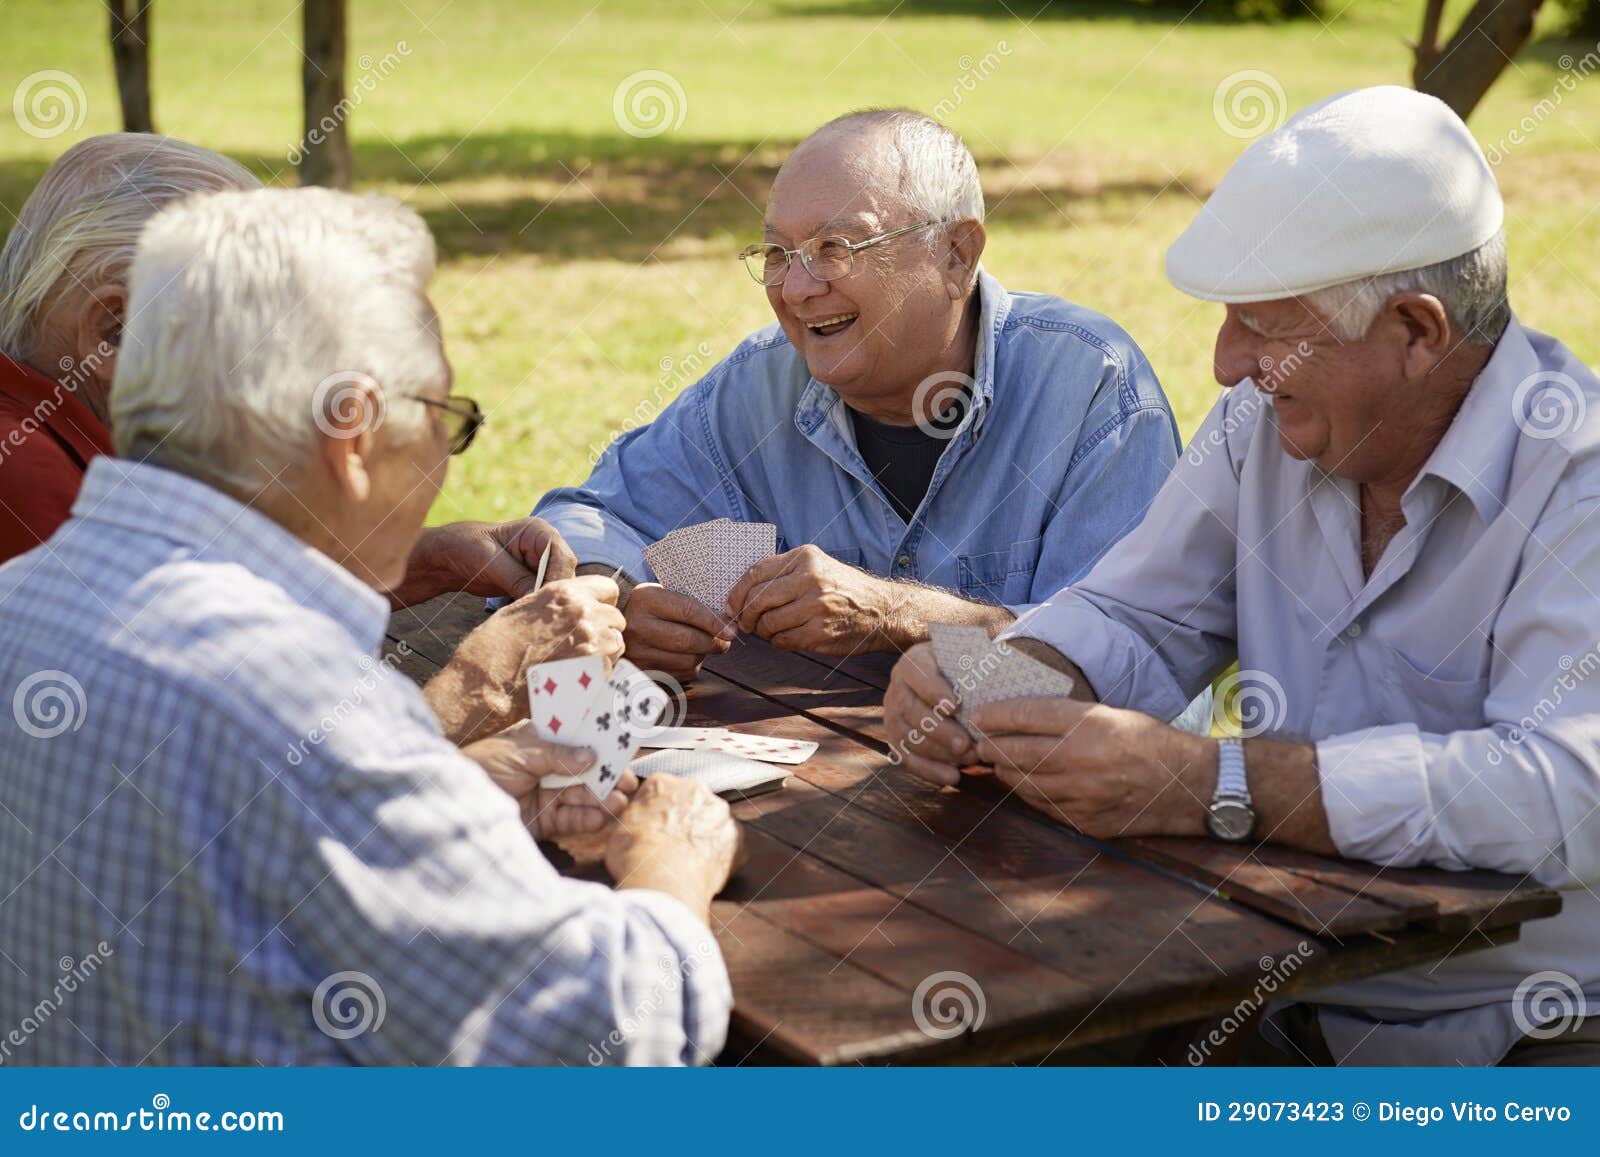 active seniors, group of old friends playing cards at park